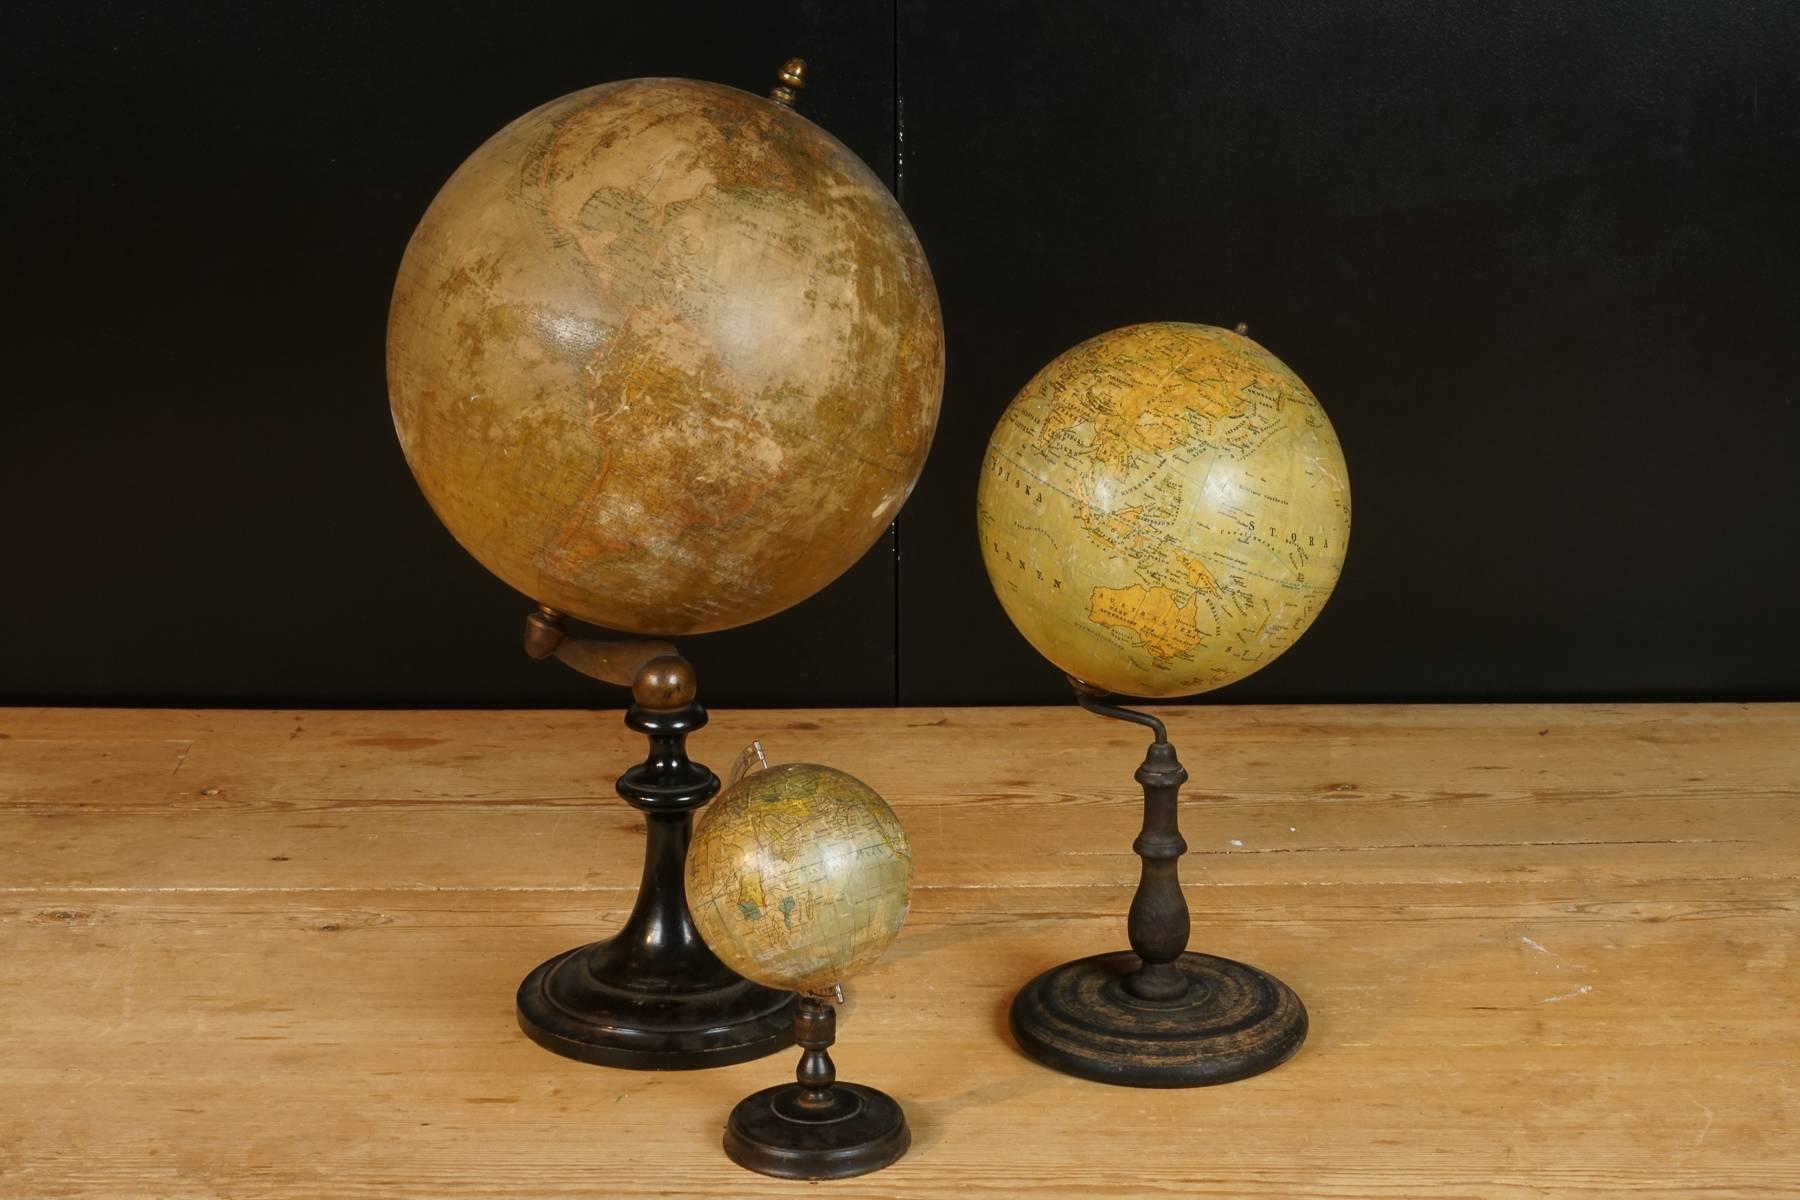 Collection of three globes, circa 1930. The three globes are made in France, Sweden and Japan.